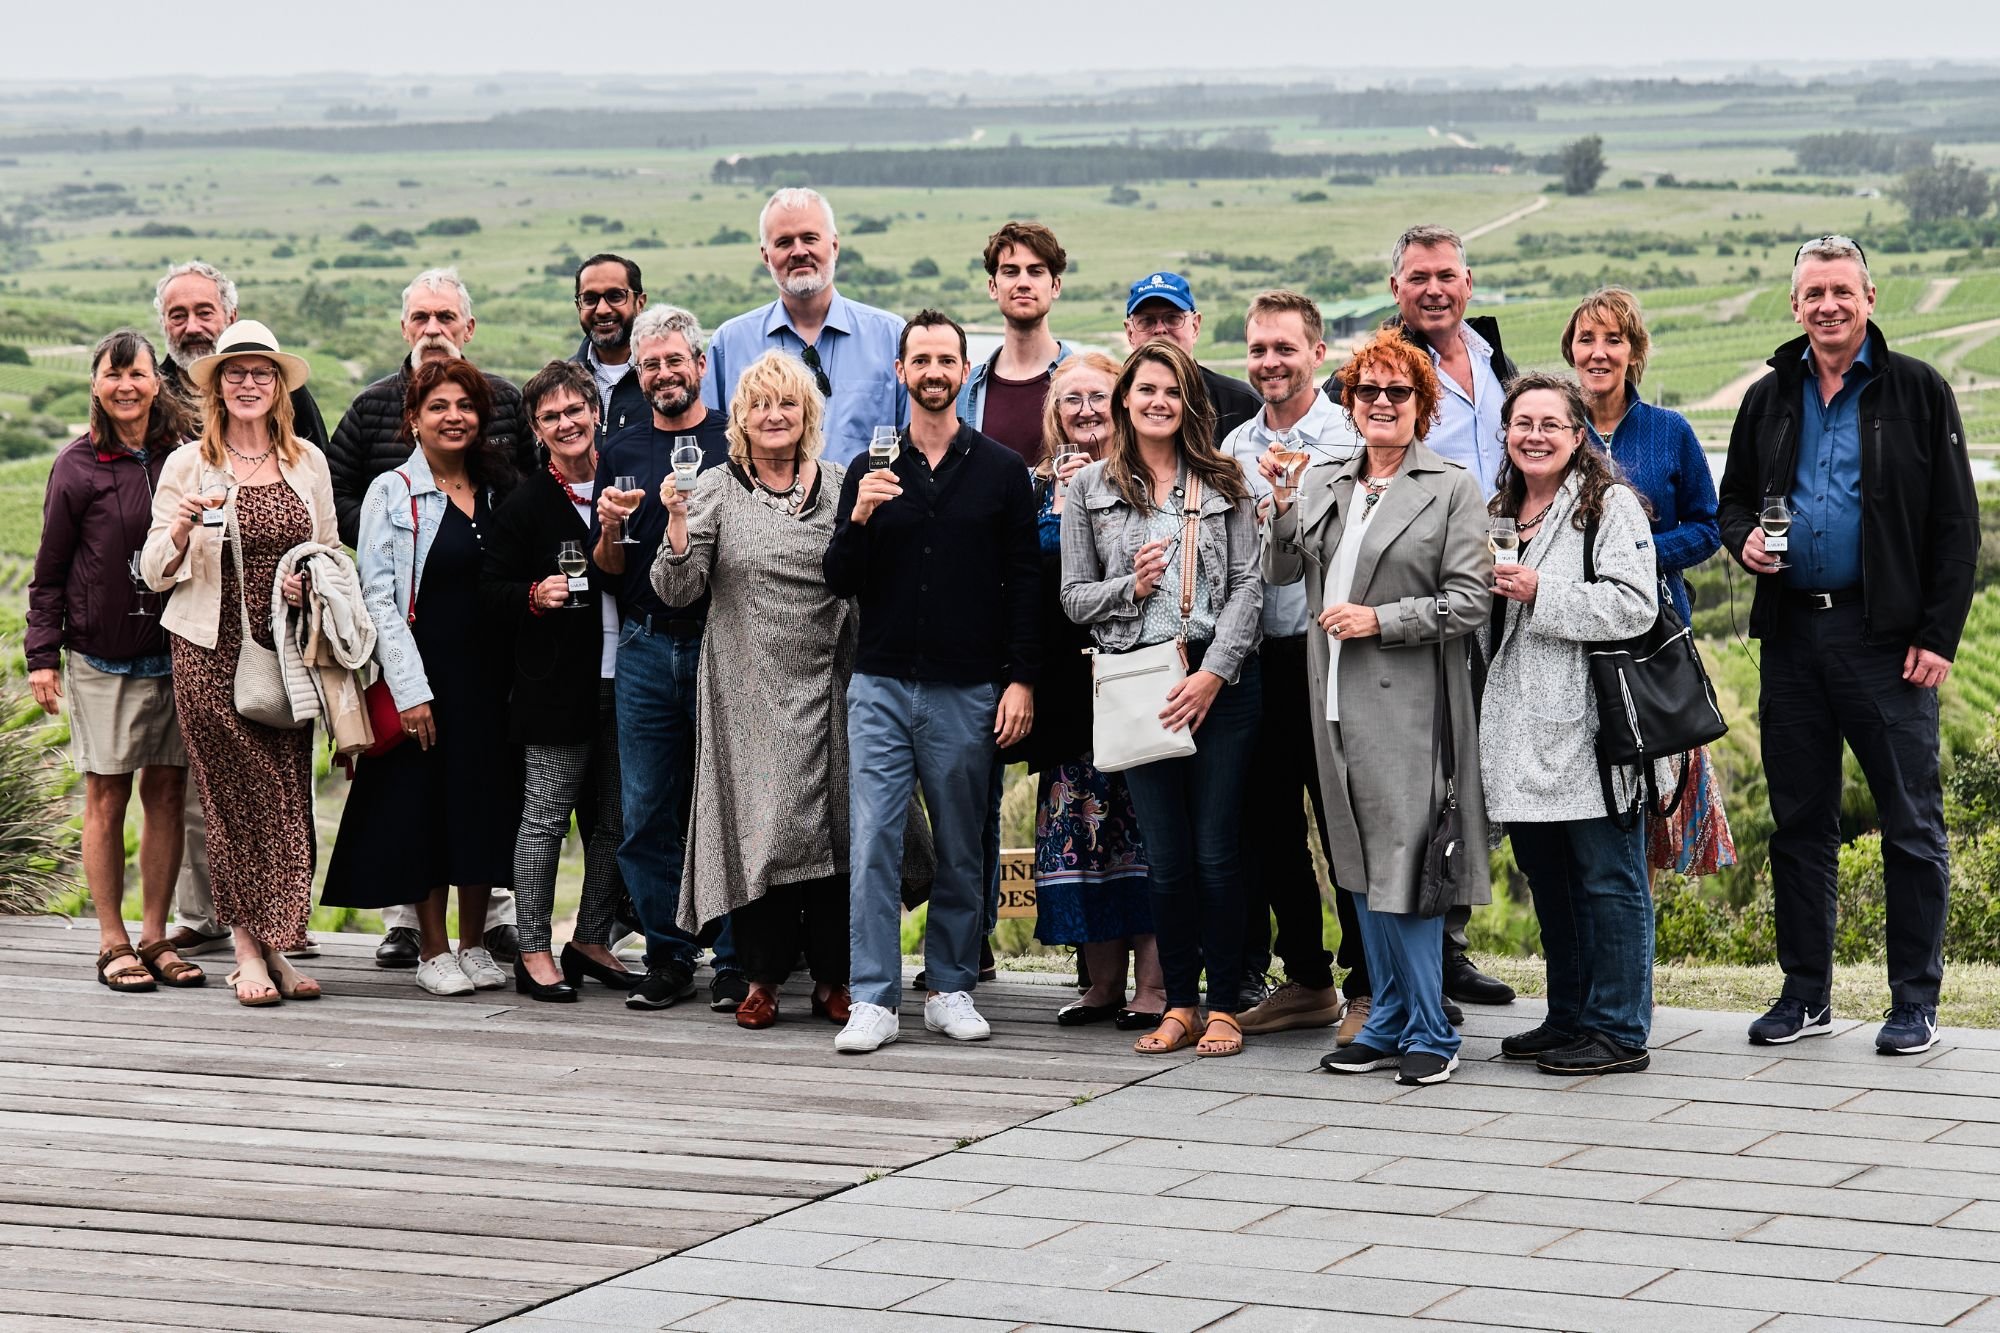 The Expat Money Community posing for a photo in front of a vineyard (1)